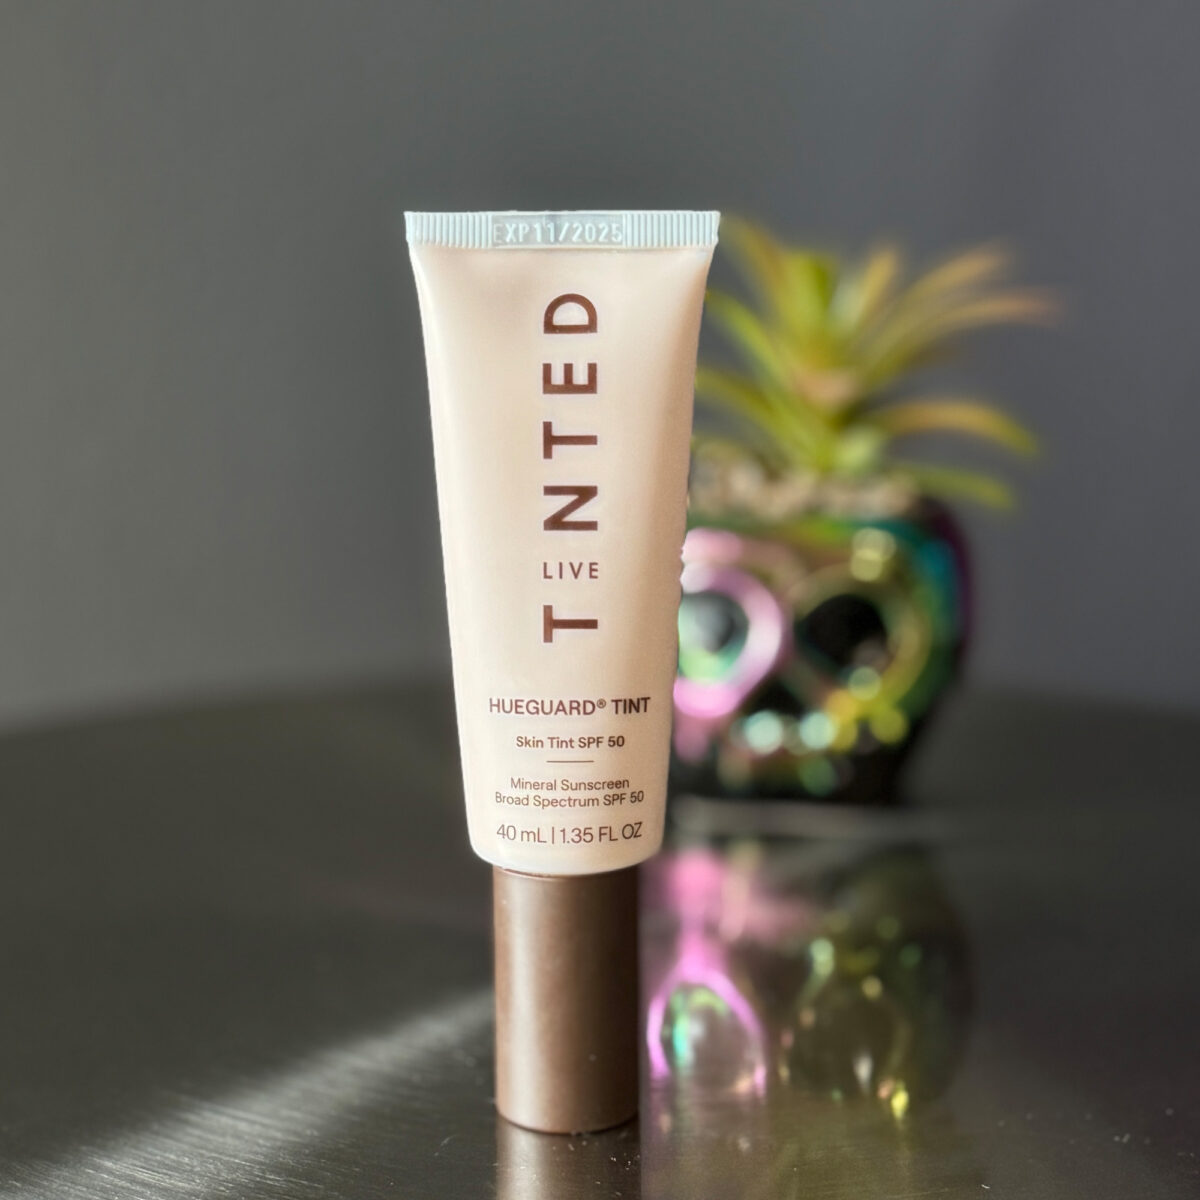 Live Tinted Hueguard Skin Tint SPF 50 Mineral Sunscreen Broad Spectrum in 9 Light